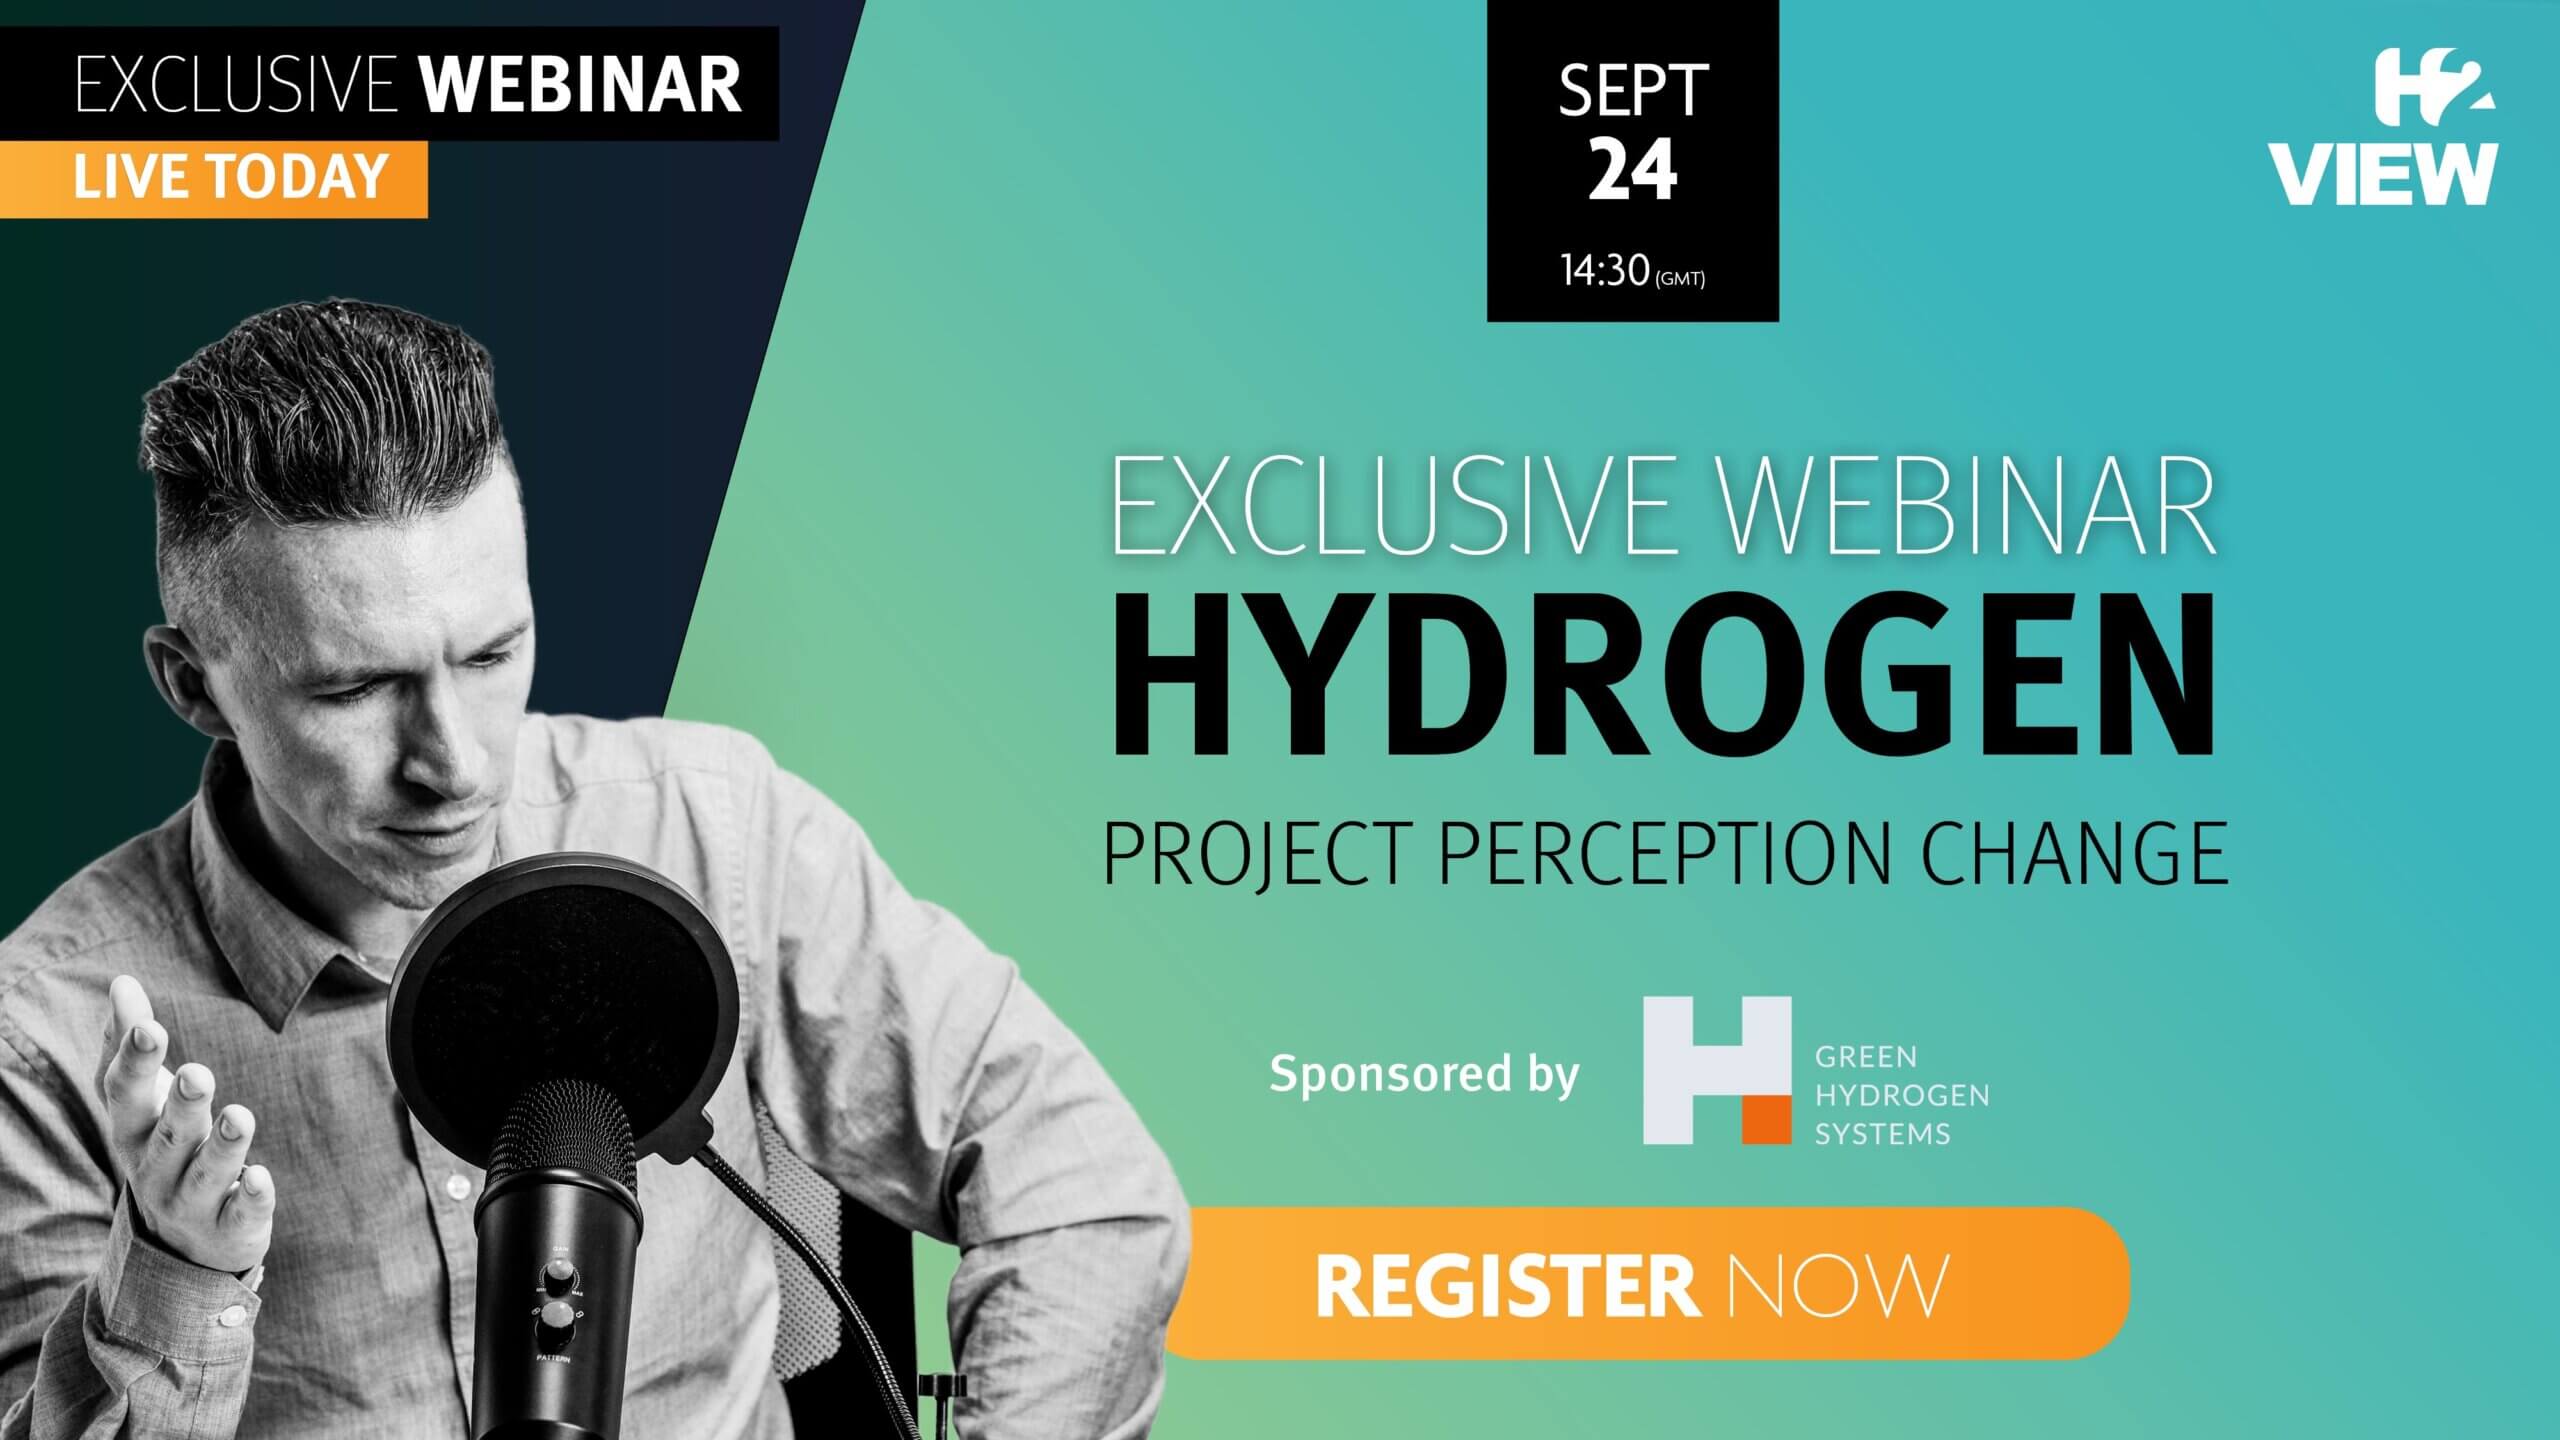 Dispelling myths and changing the perception: Hydrogen is not only safe, but very effective